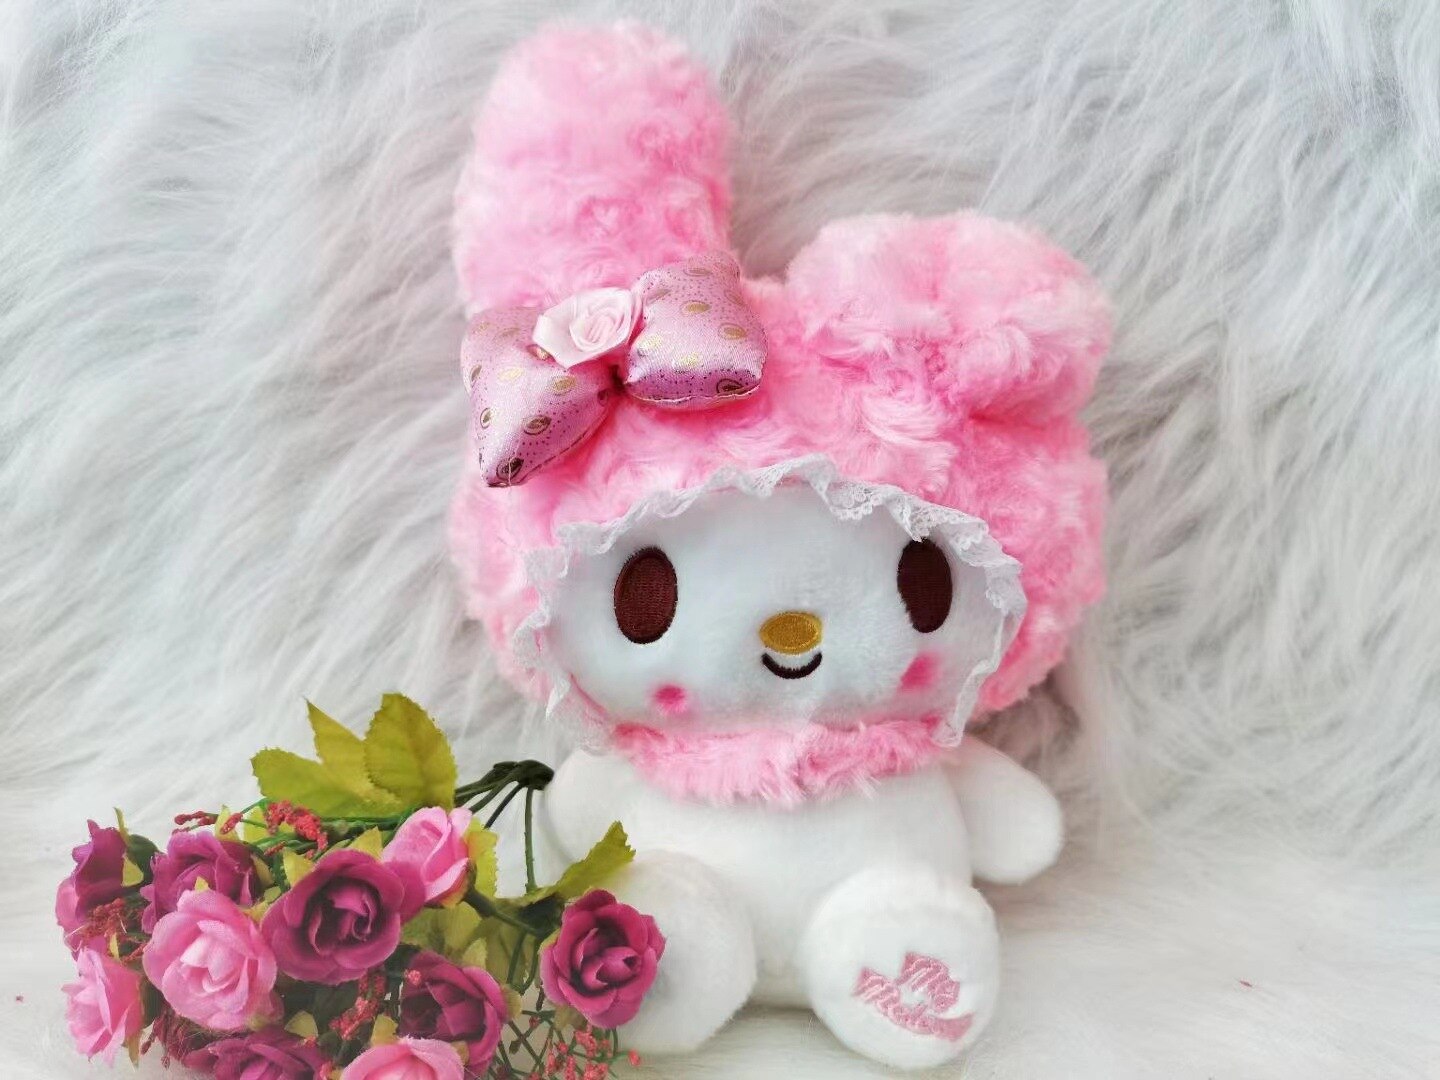 24cm Kawaii Sanrio My Melody Plush Toy Gift Children Doll Home Decoration Comfort Doll Anime Accessories 3 - My Melody Plush